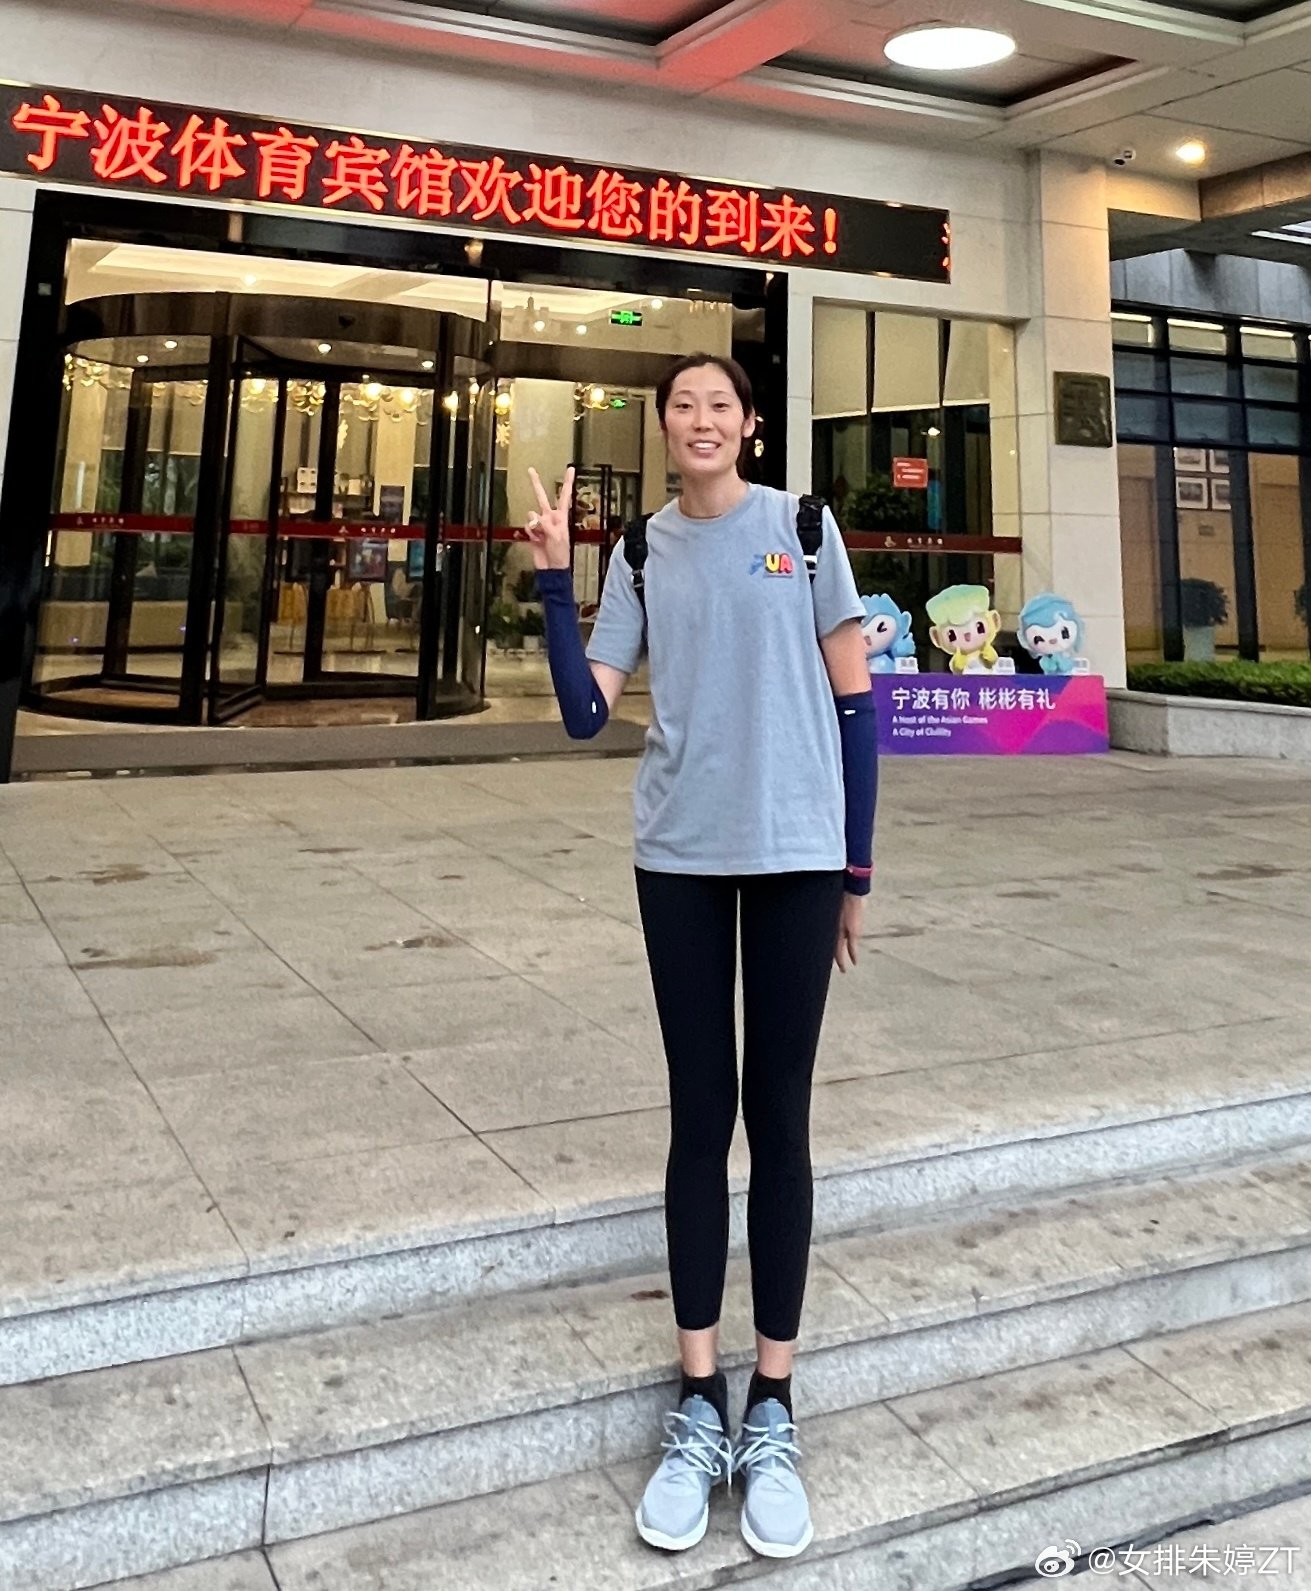 Star spiker Zhu Ting pays her first visit in two years to the Chinese women’s volleyball team’s training base in Beilun. Photo: Weibo/Zhu Ting